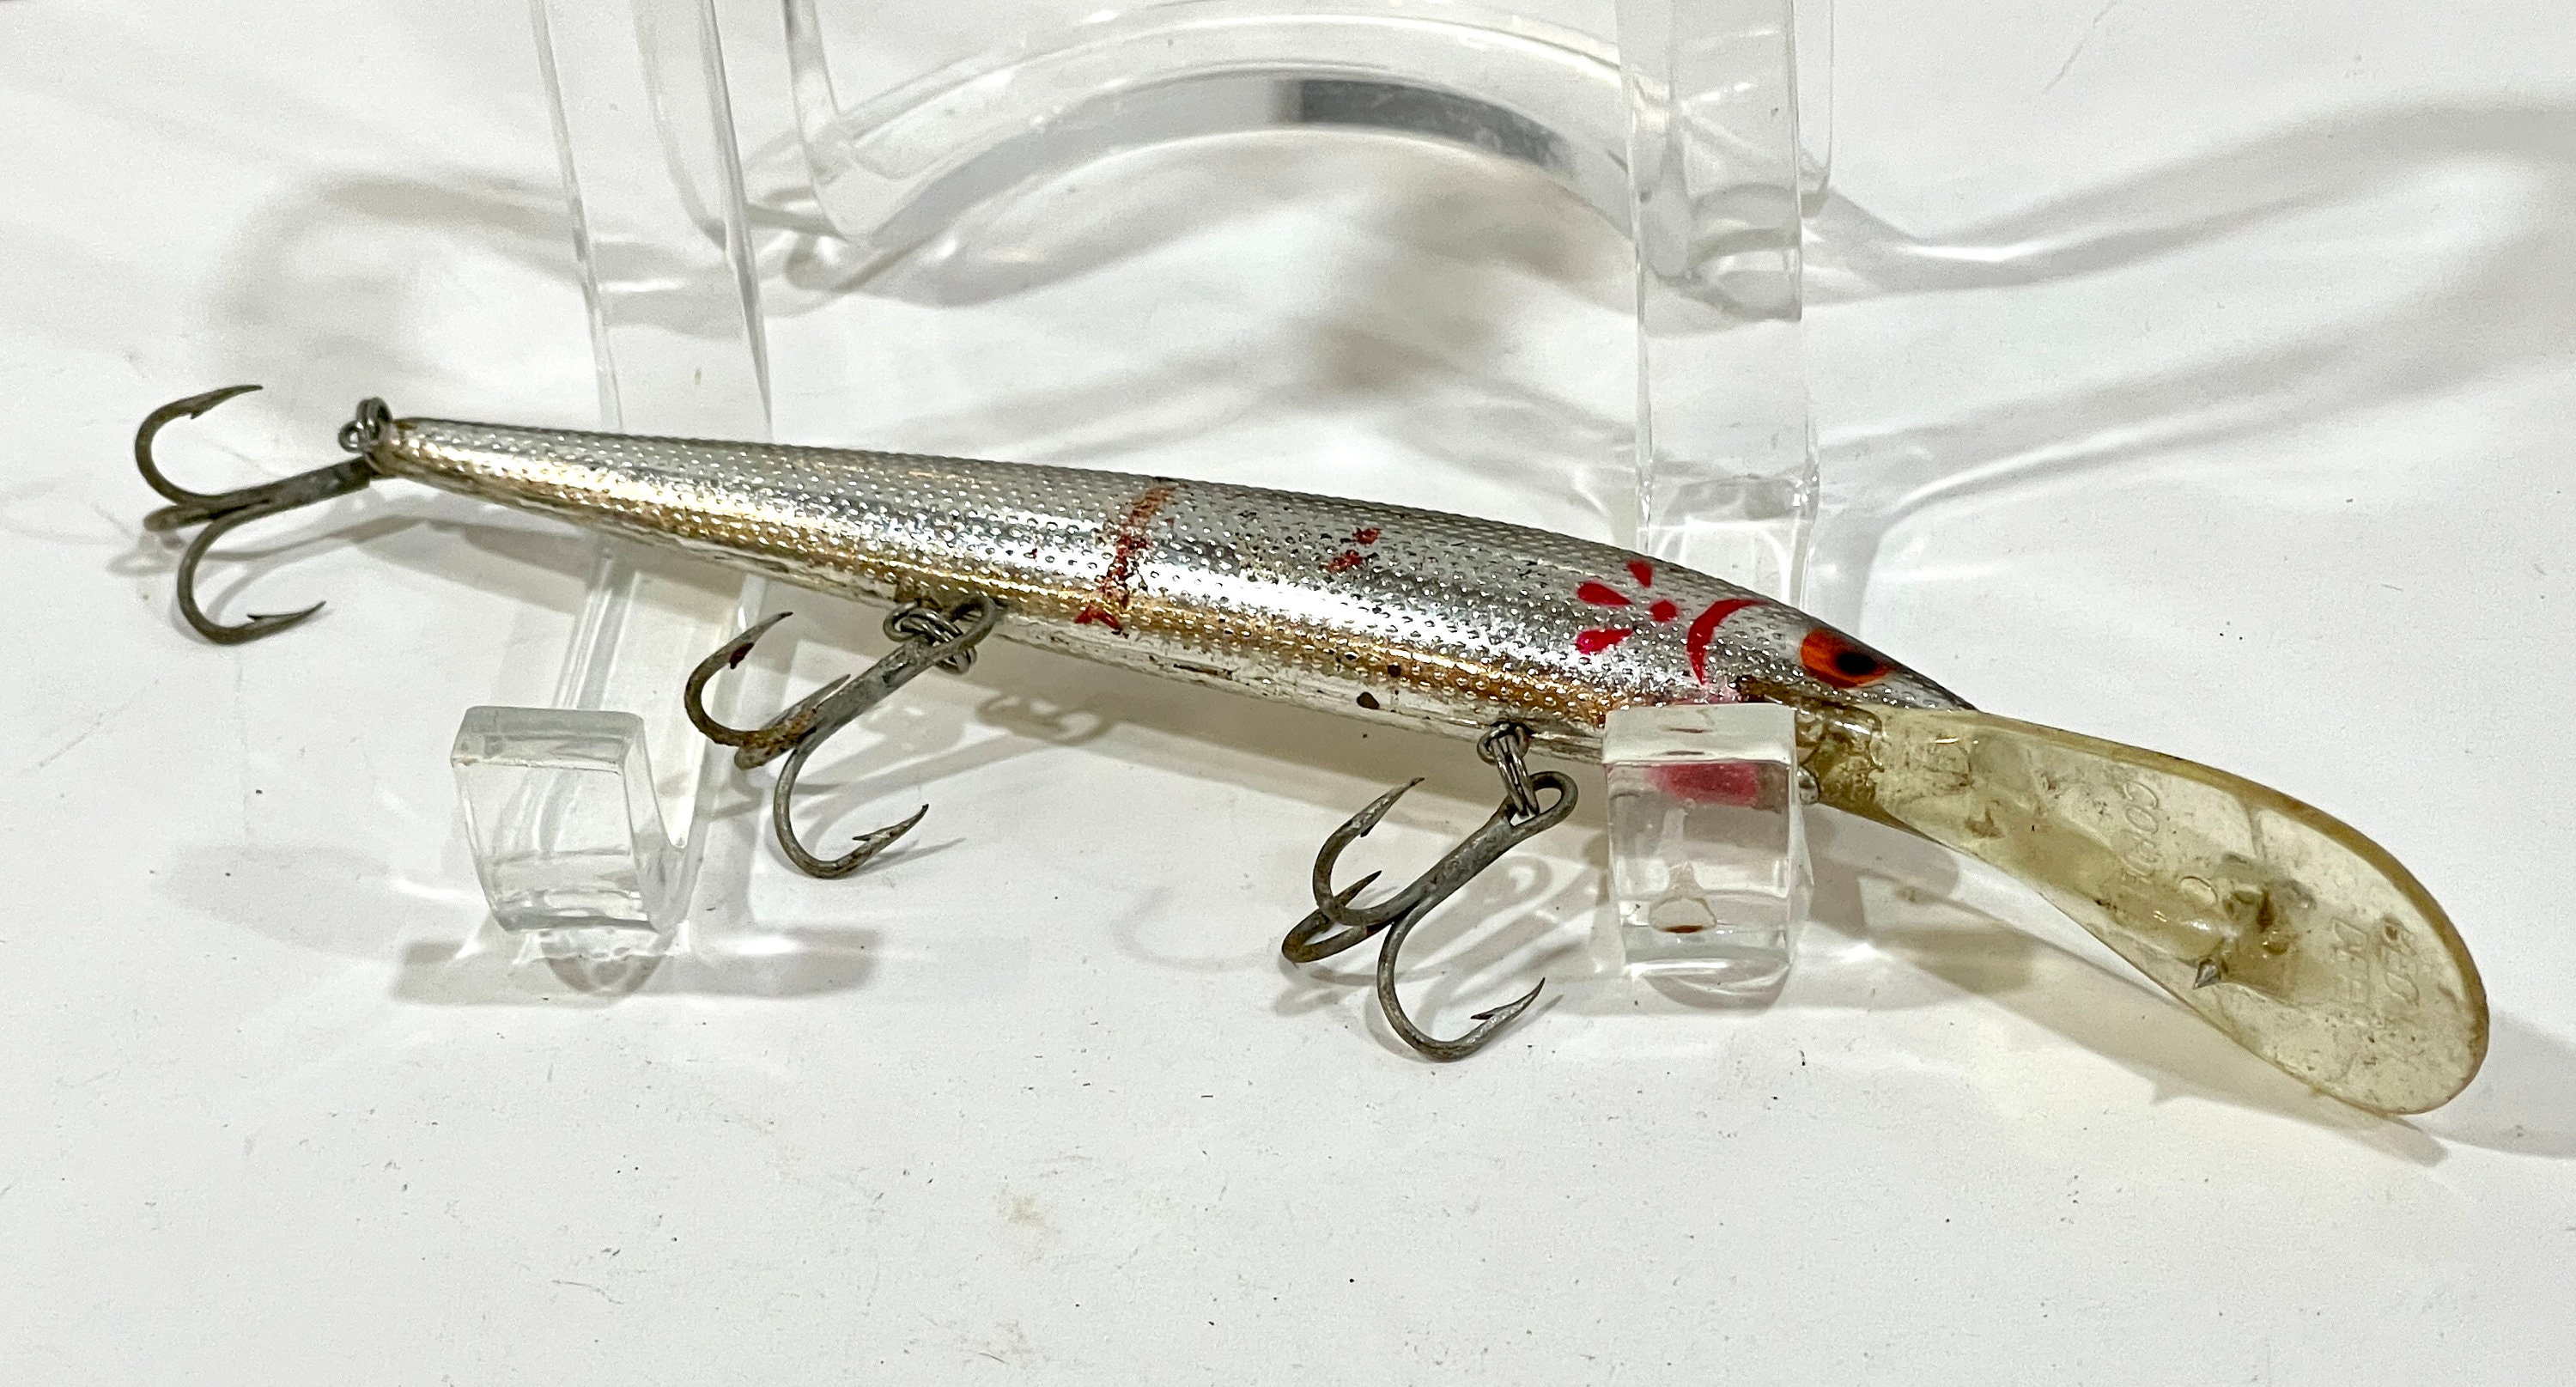 Vintage Lure, Cotton Cordell, Redfin, Deep Water, Straight FL. Swimmer, 5  Inches Long, Red Silver, Fishing Tackle, 1980s Era, Gift Idea -  Norway